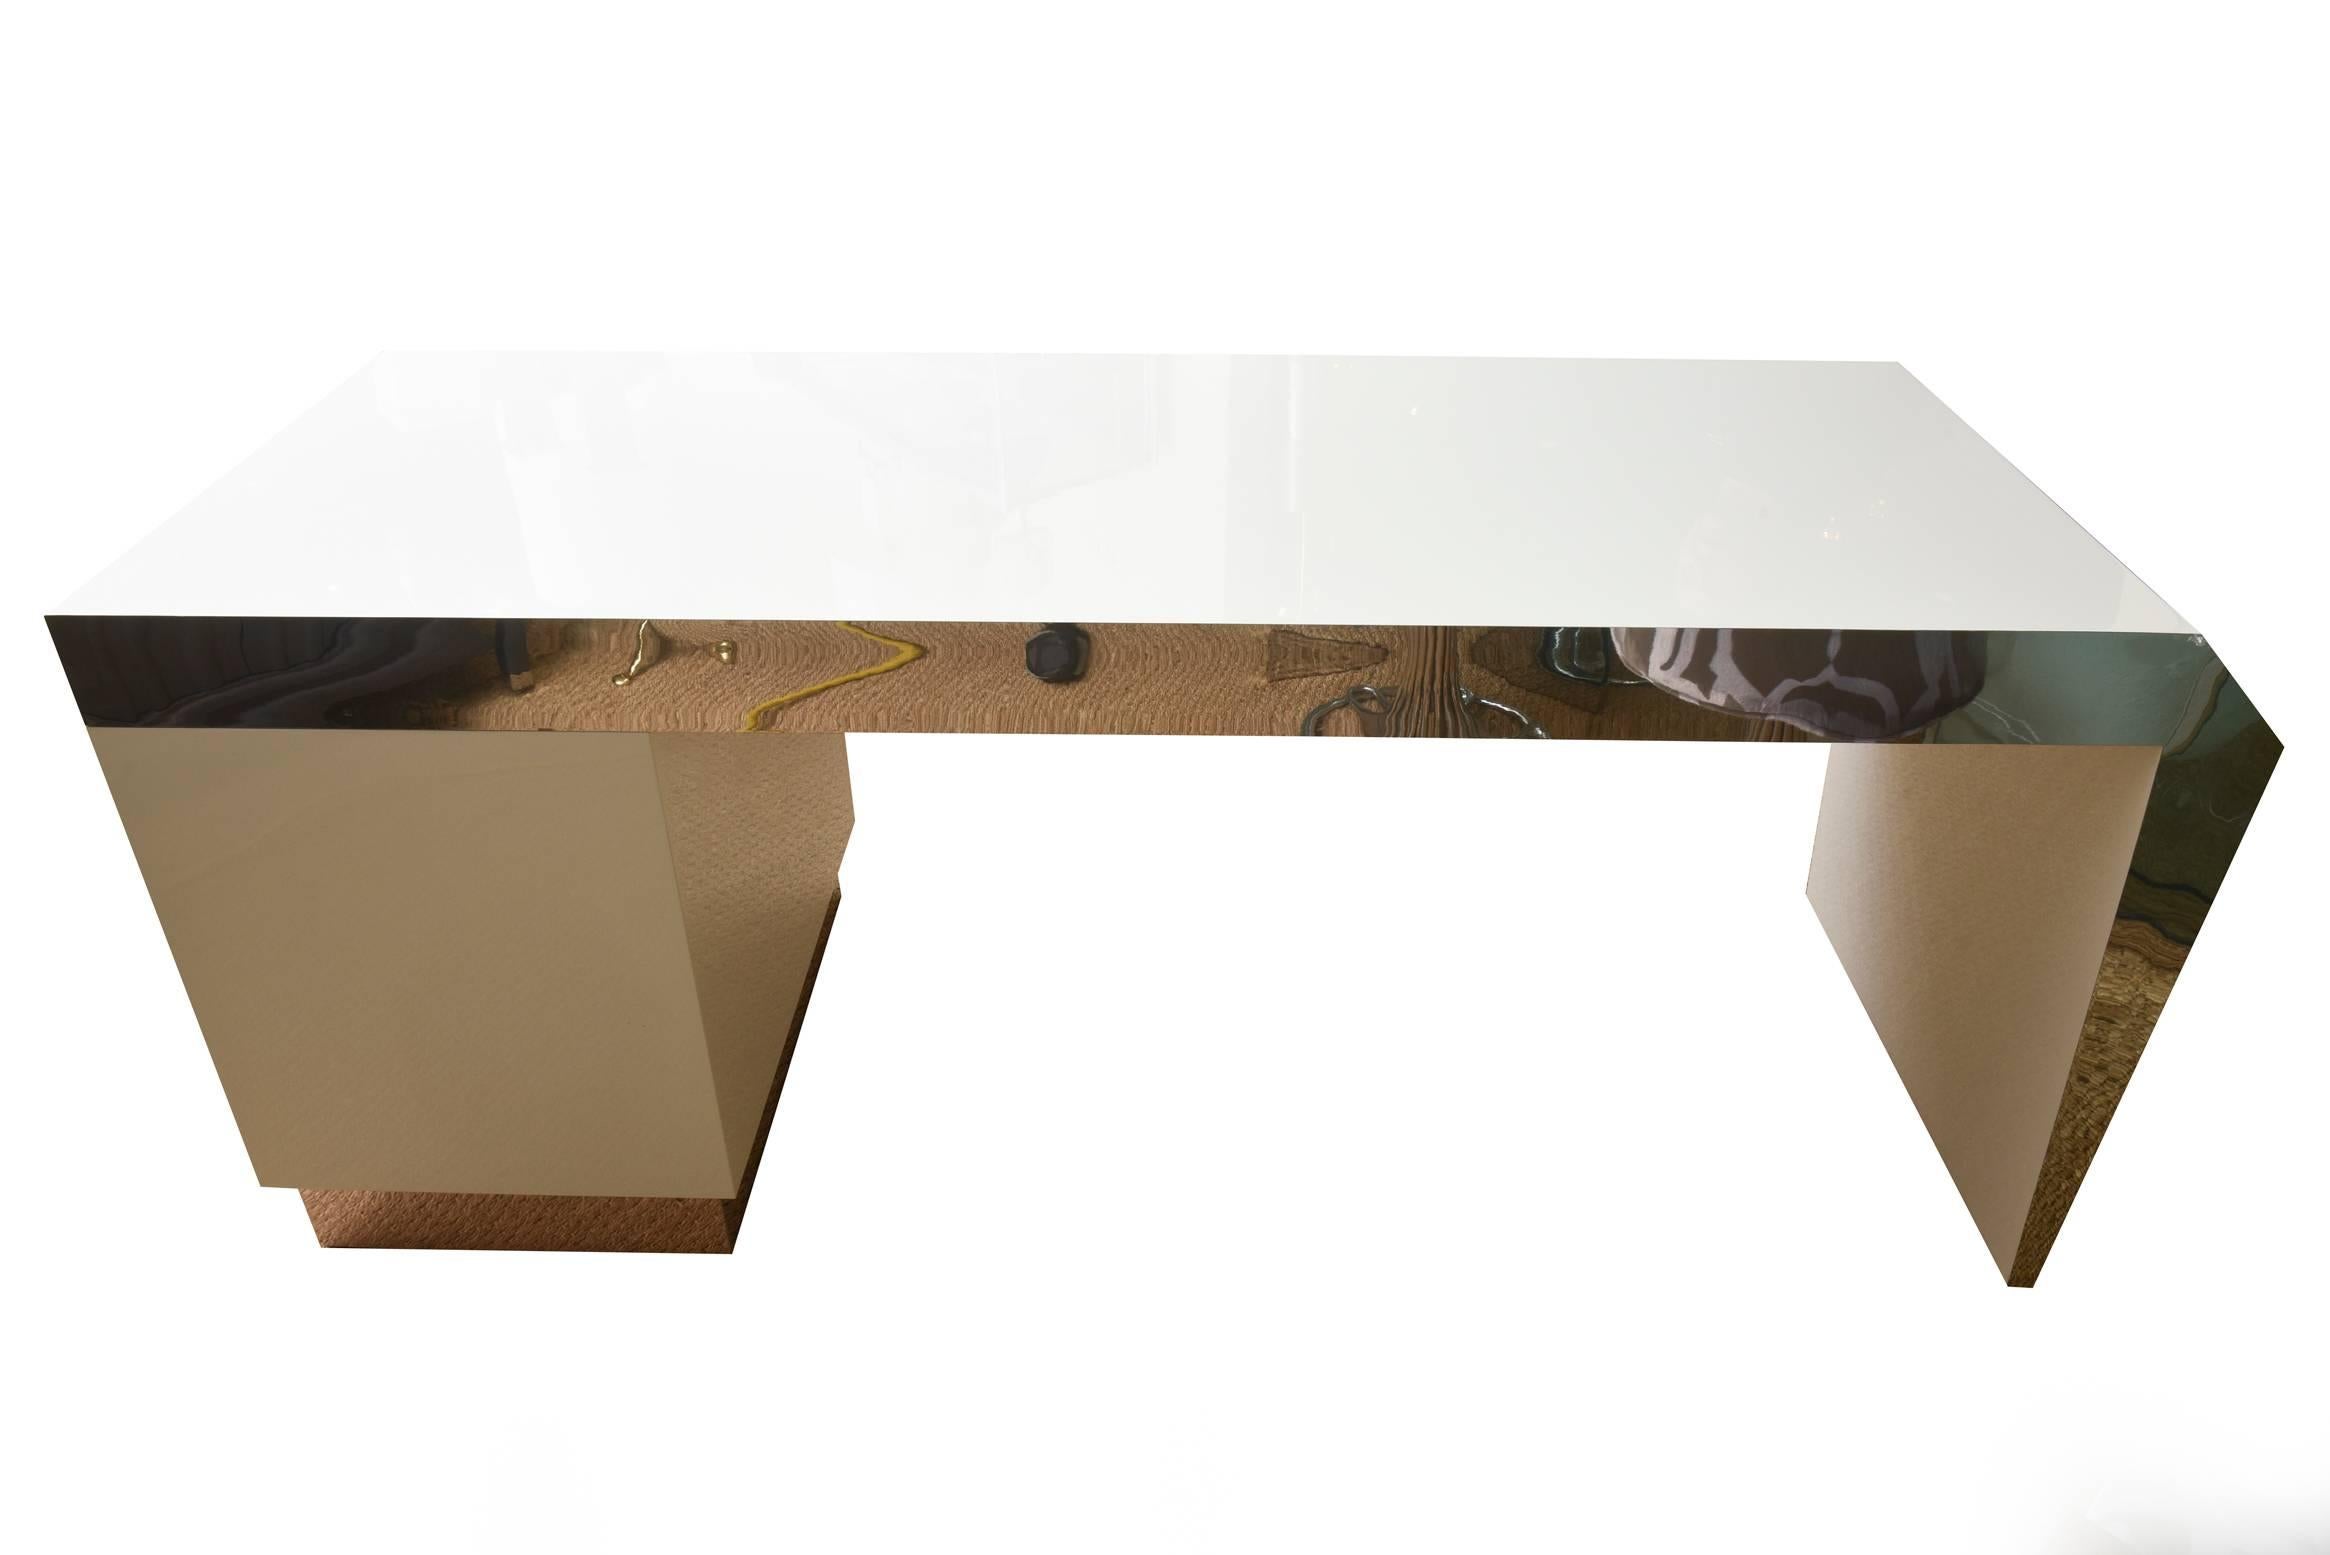 This very heavy and monumental fully restored white lacquered and stainless steel amazing desk is sculptural. It has drawers on the right hand side and one middle desk drawer. Stainless steel wrapping is on the front apron, the back, the bottom and